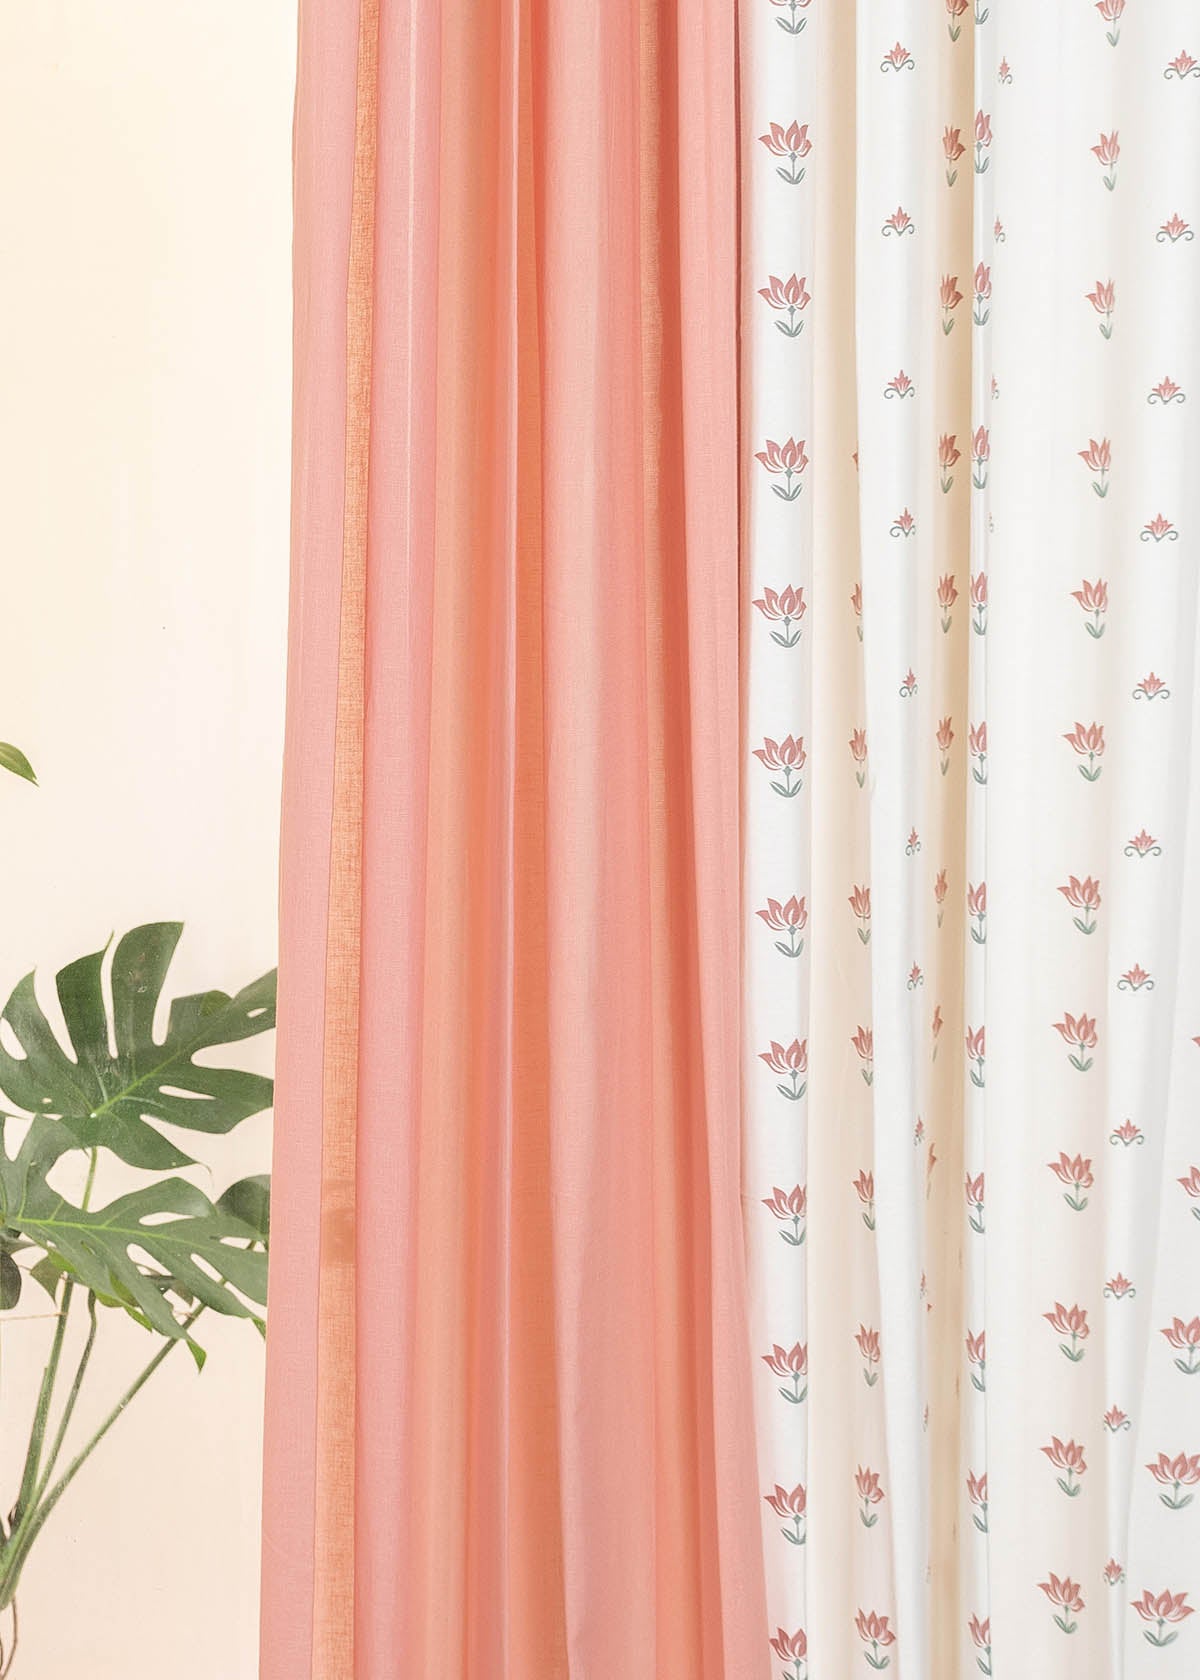 Lotus Pond, Clay Sheer Set Of 4 Combo Cotton Curtain - Off White